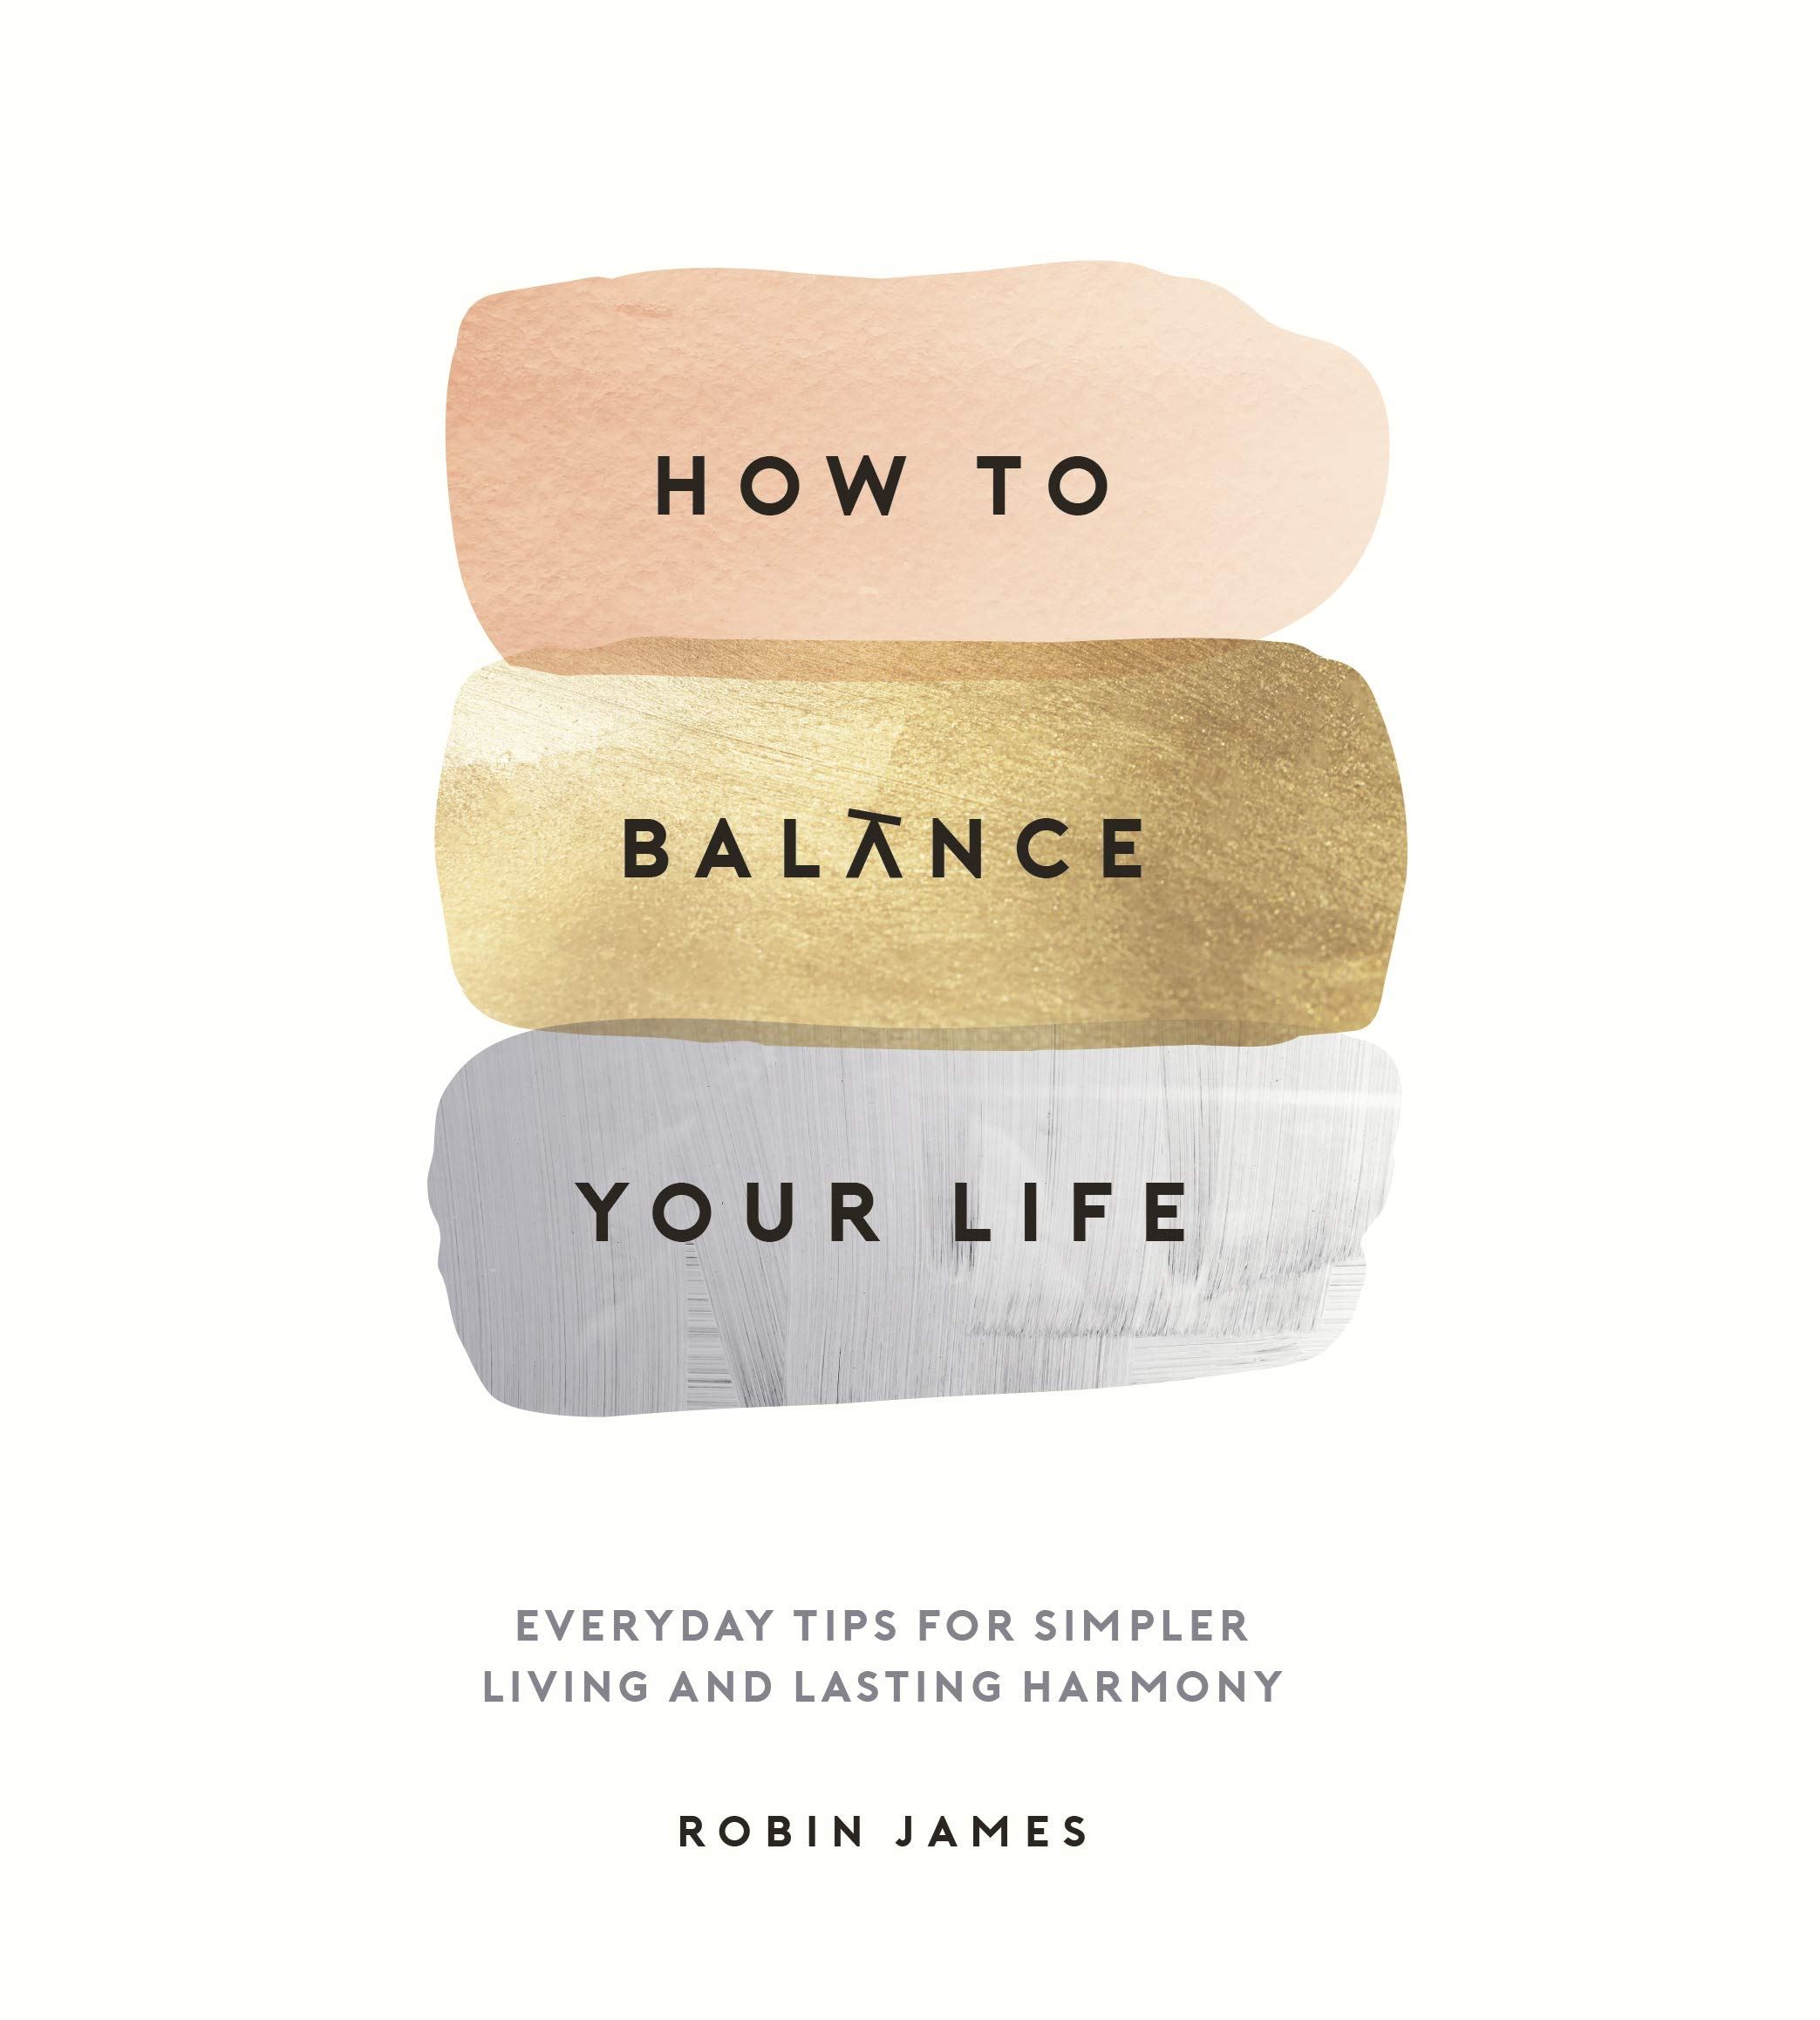 How to Balance Your Life